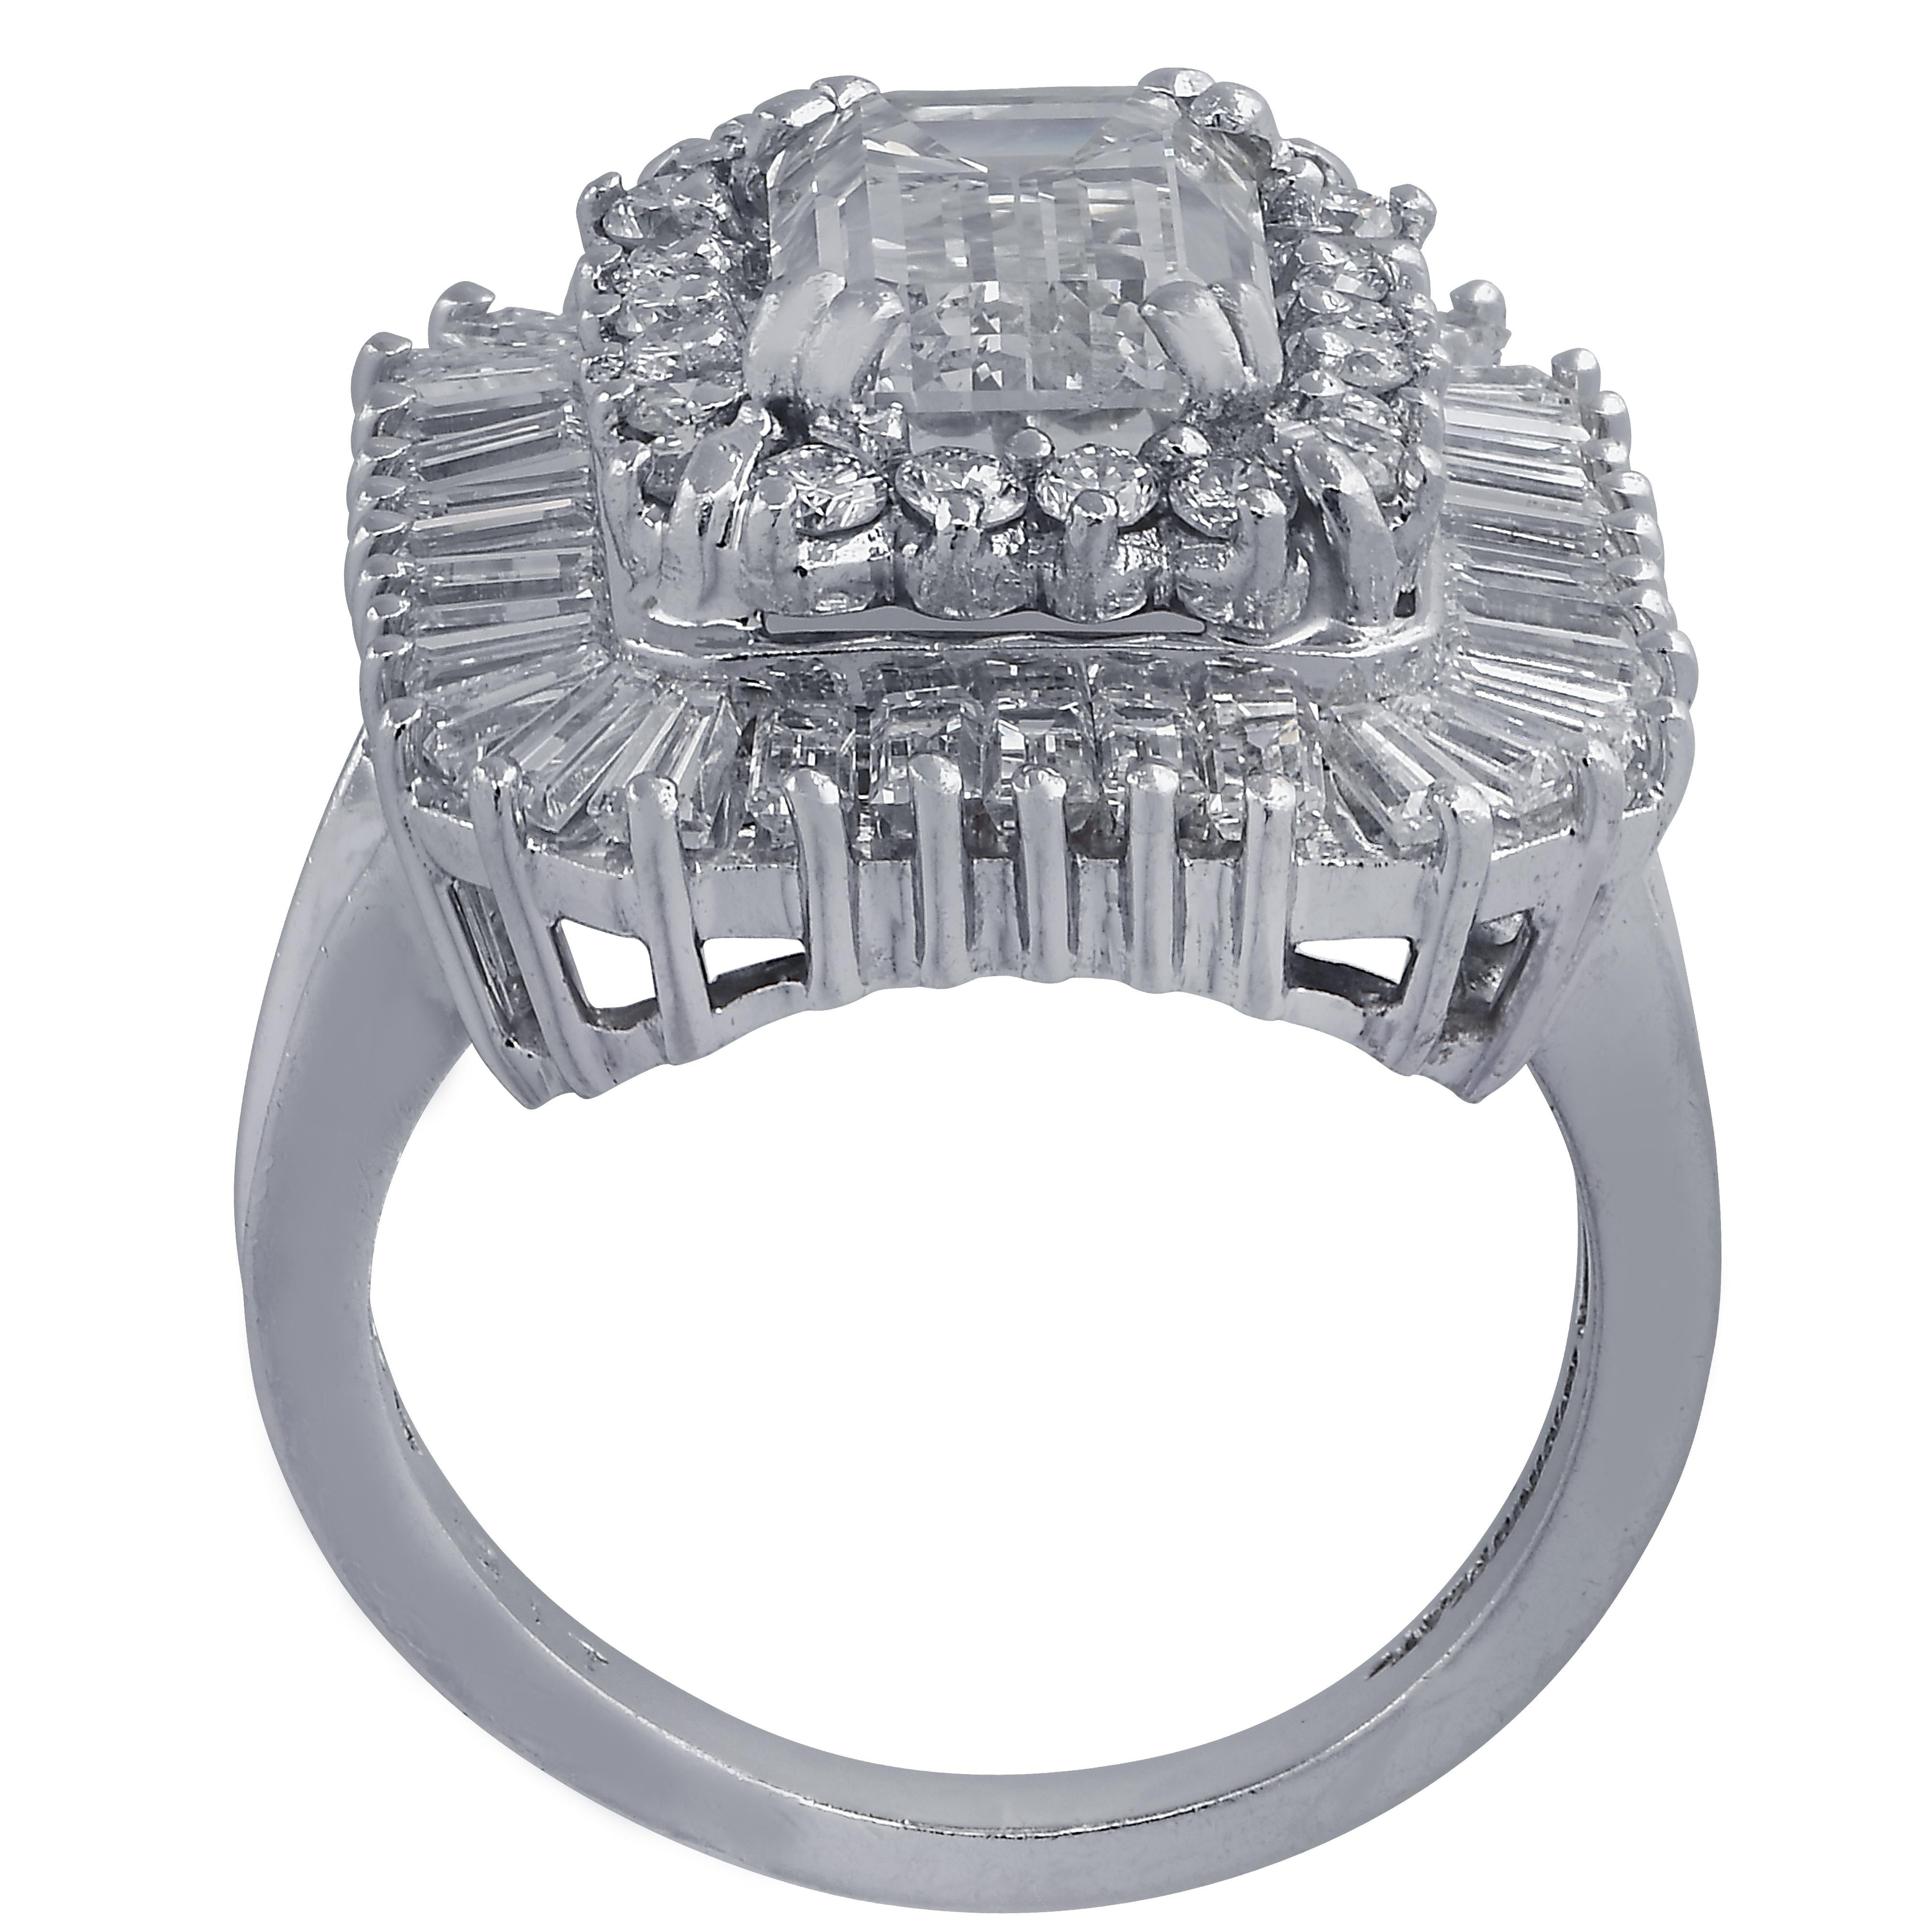 Striking cocktail ring crafted in platinum featuring an emerald cut diamond weighing approximately 3.5 carats, J color, SI clarity, resting on a bed of 59 round brilliant cut diamonds and baguette cut diamonds weighing approximately 2.5 carats